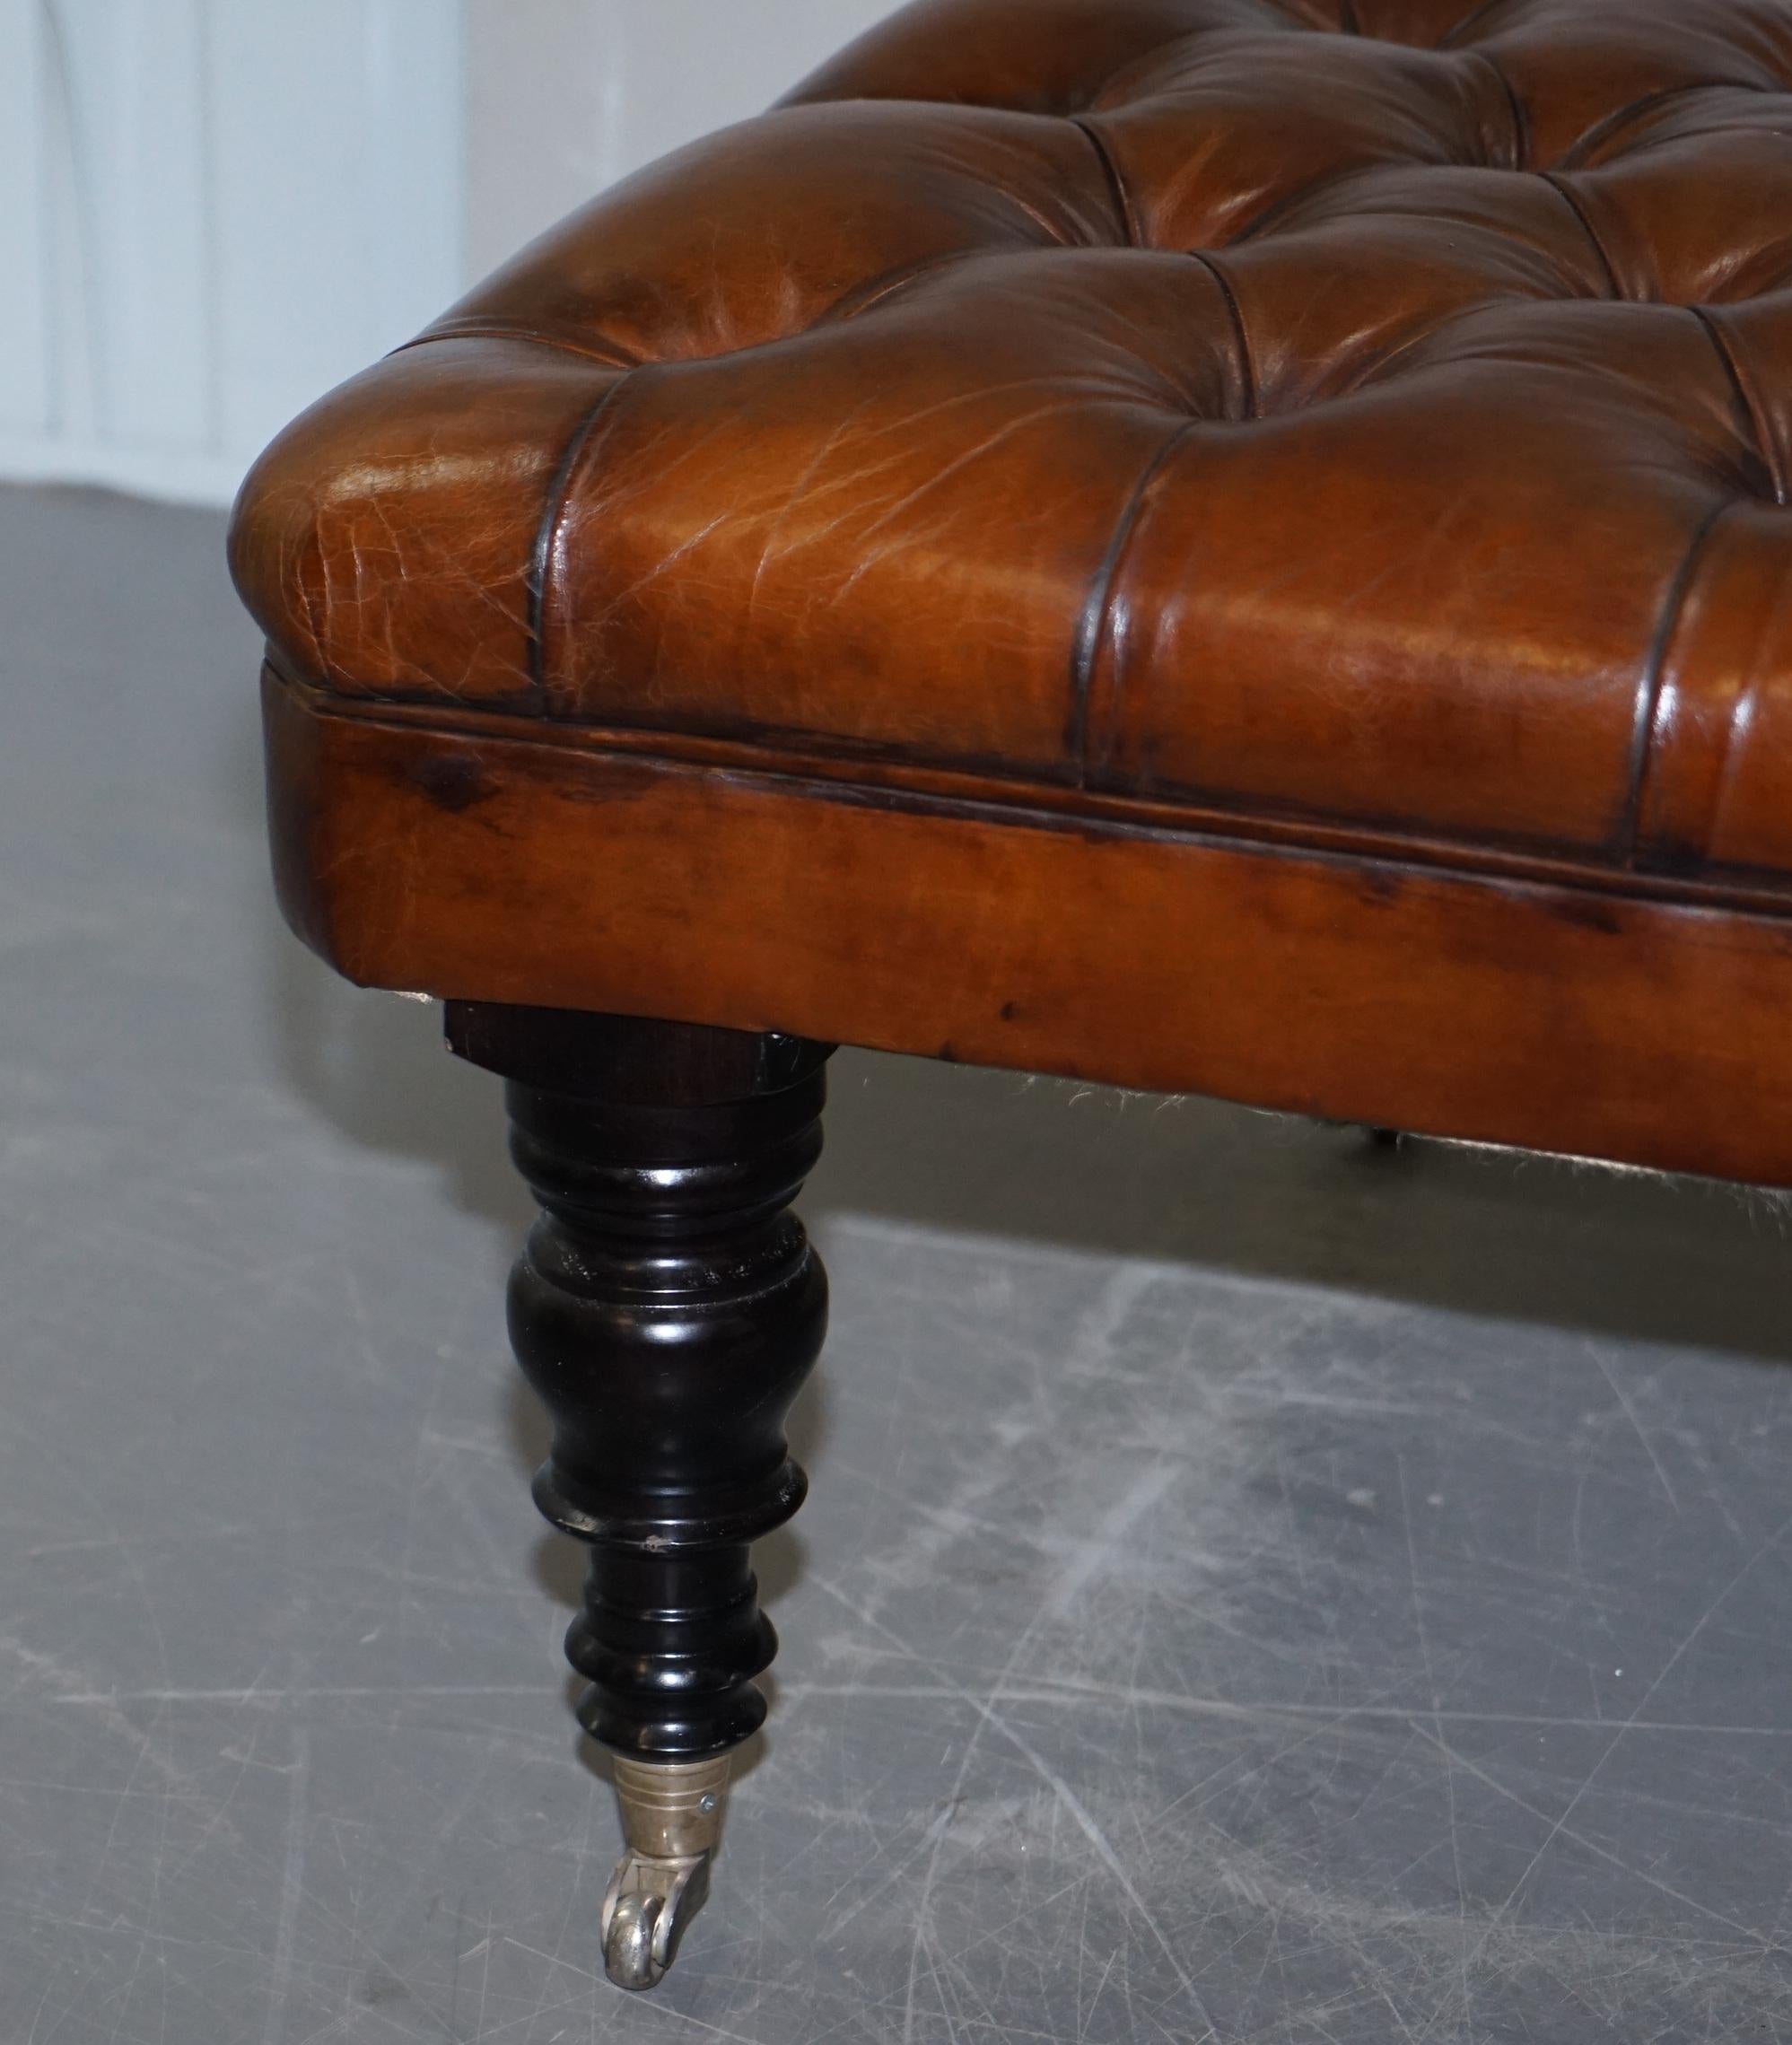 1 of 2 George Smith Restored Brown Leather Chesterfield Hearth Footstools 13